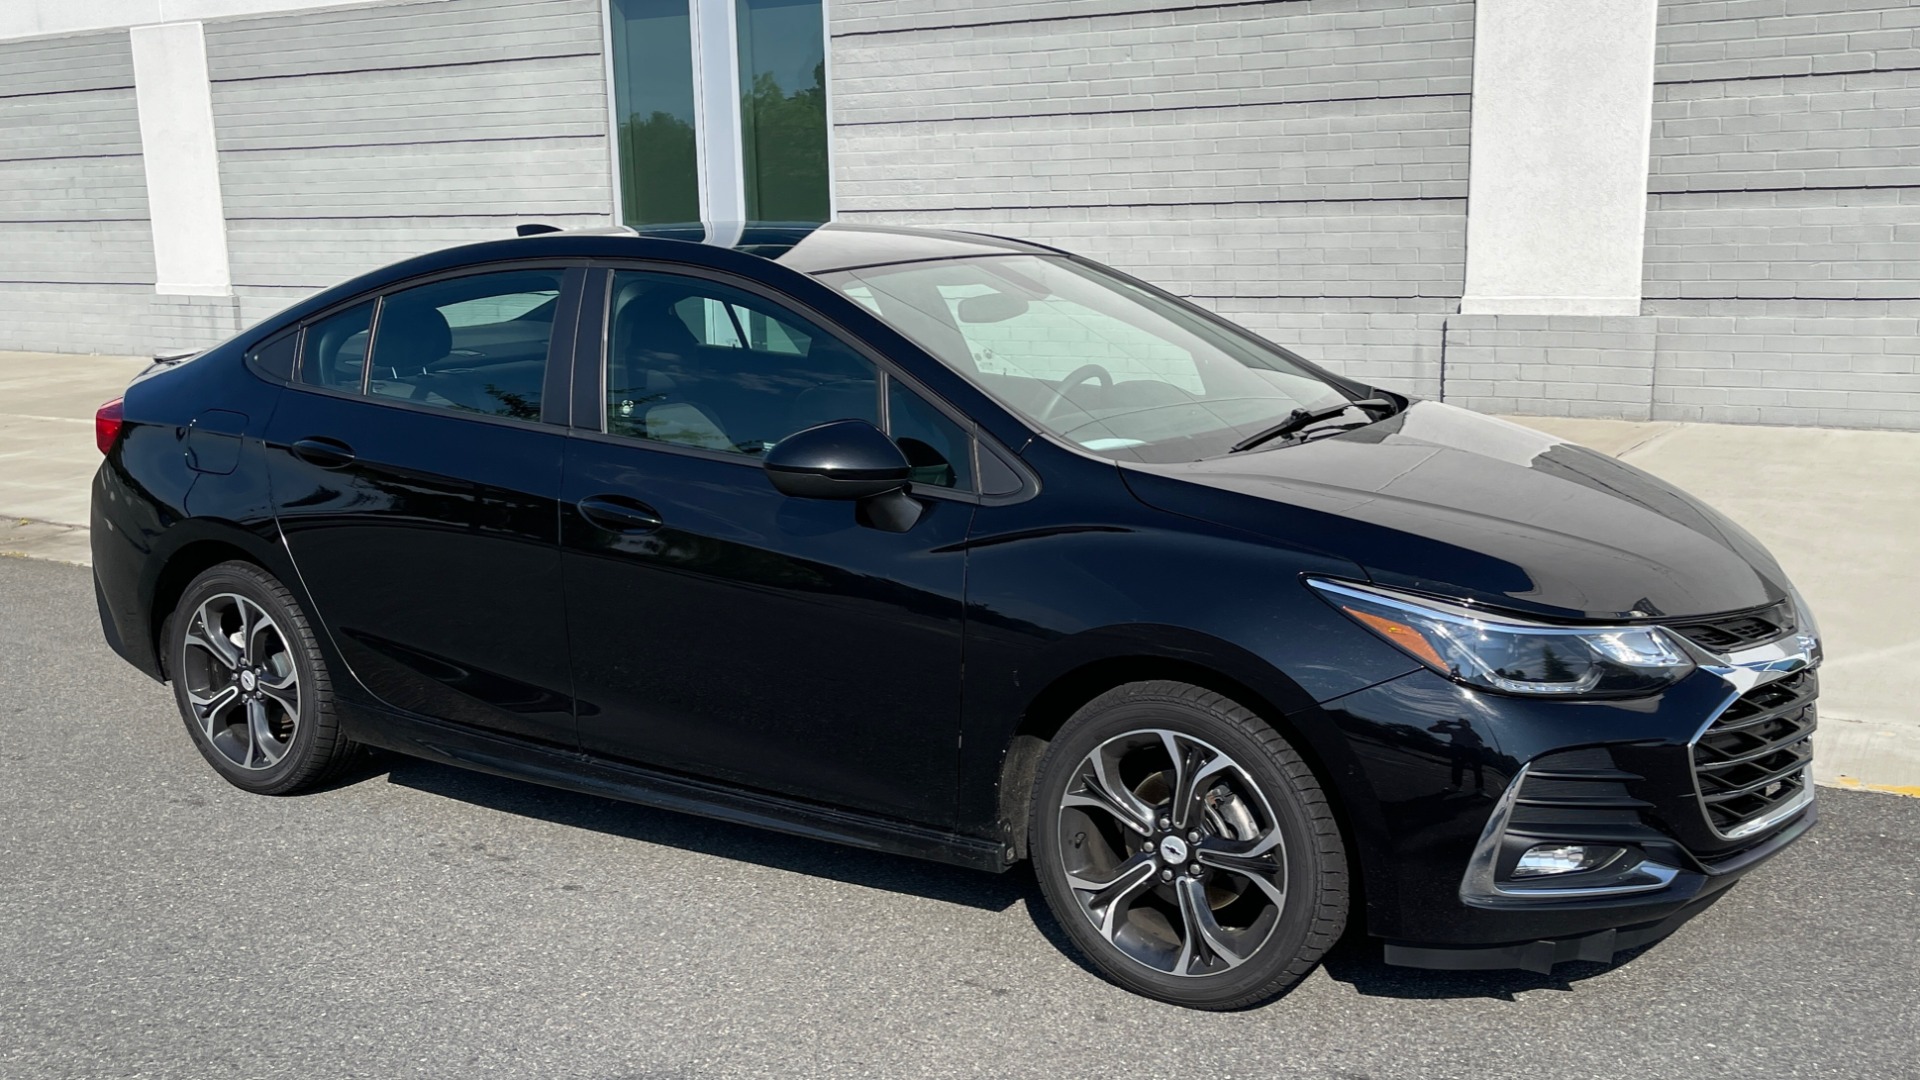 Used 2019 Chevrolet CRUZE LT / 1.4L TURBO / 6-SPD AUTO / AIR CONDITIONING / REARVIEW for sale Sold at Formula Imports in Charlotte NC 28227 6